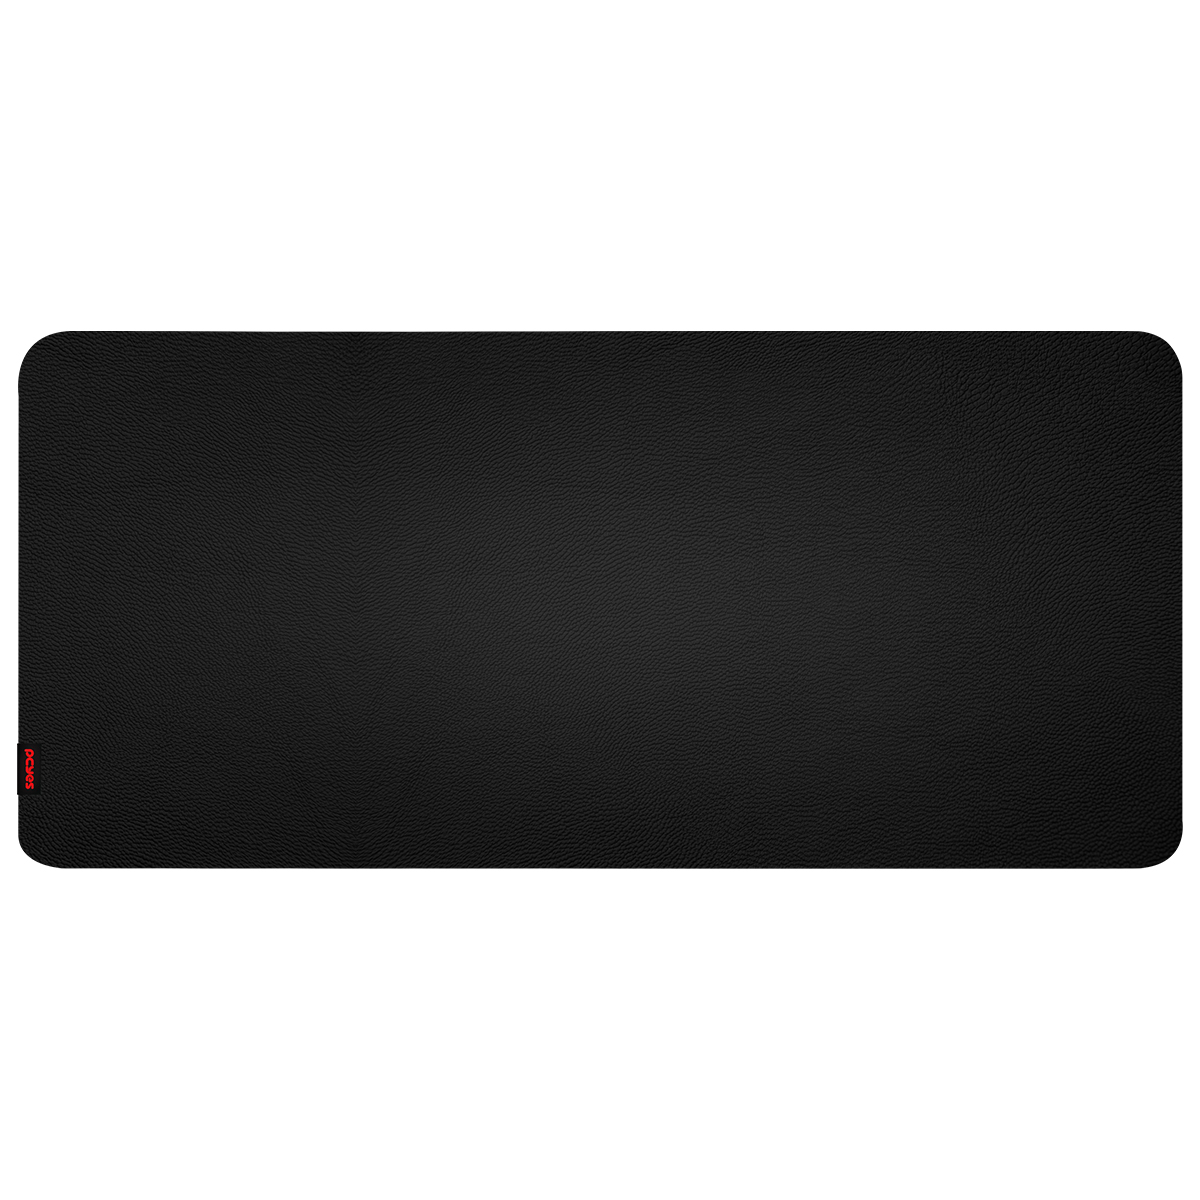 Mouse Pad Exclusive Preto 800x400 - Pmpex